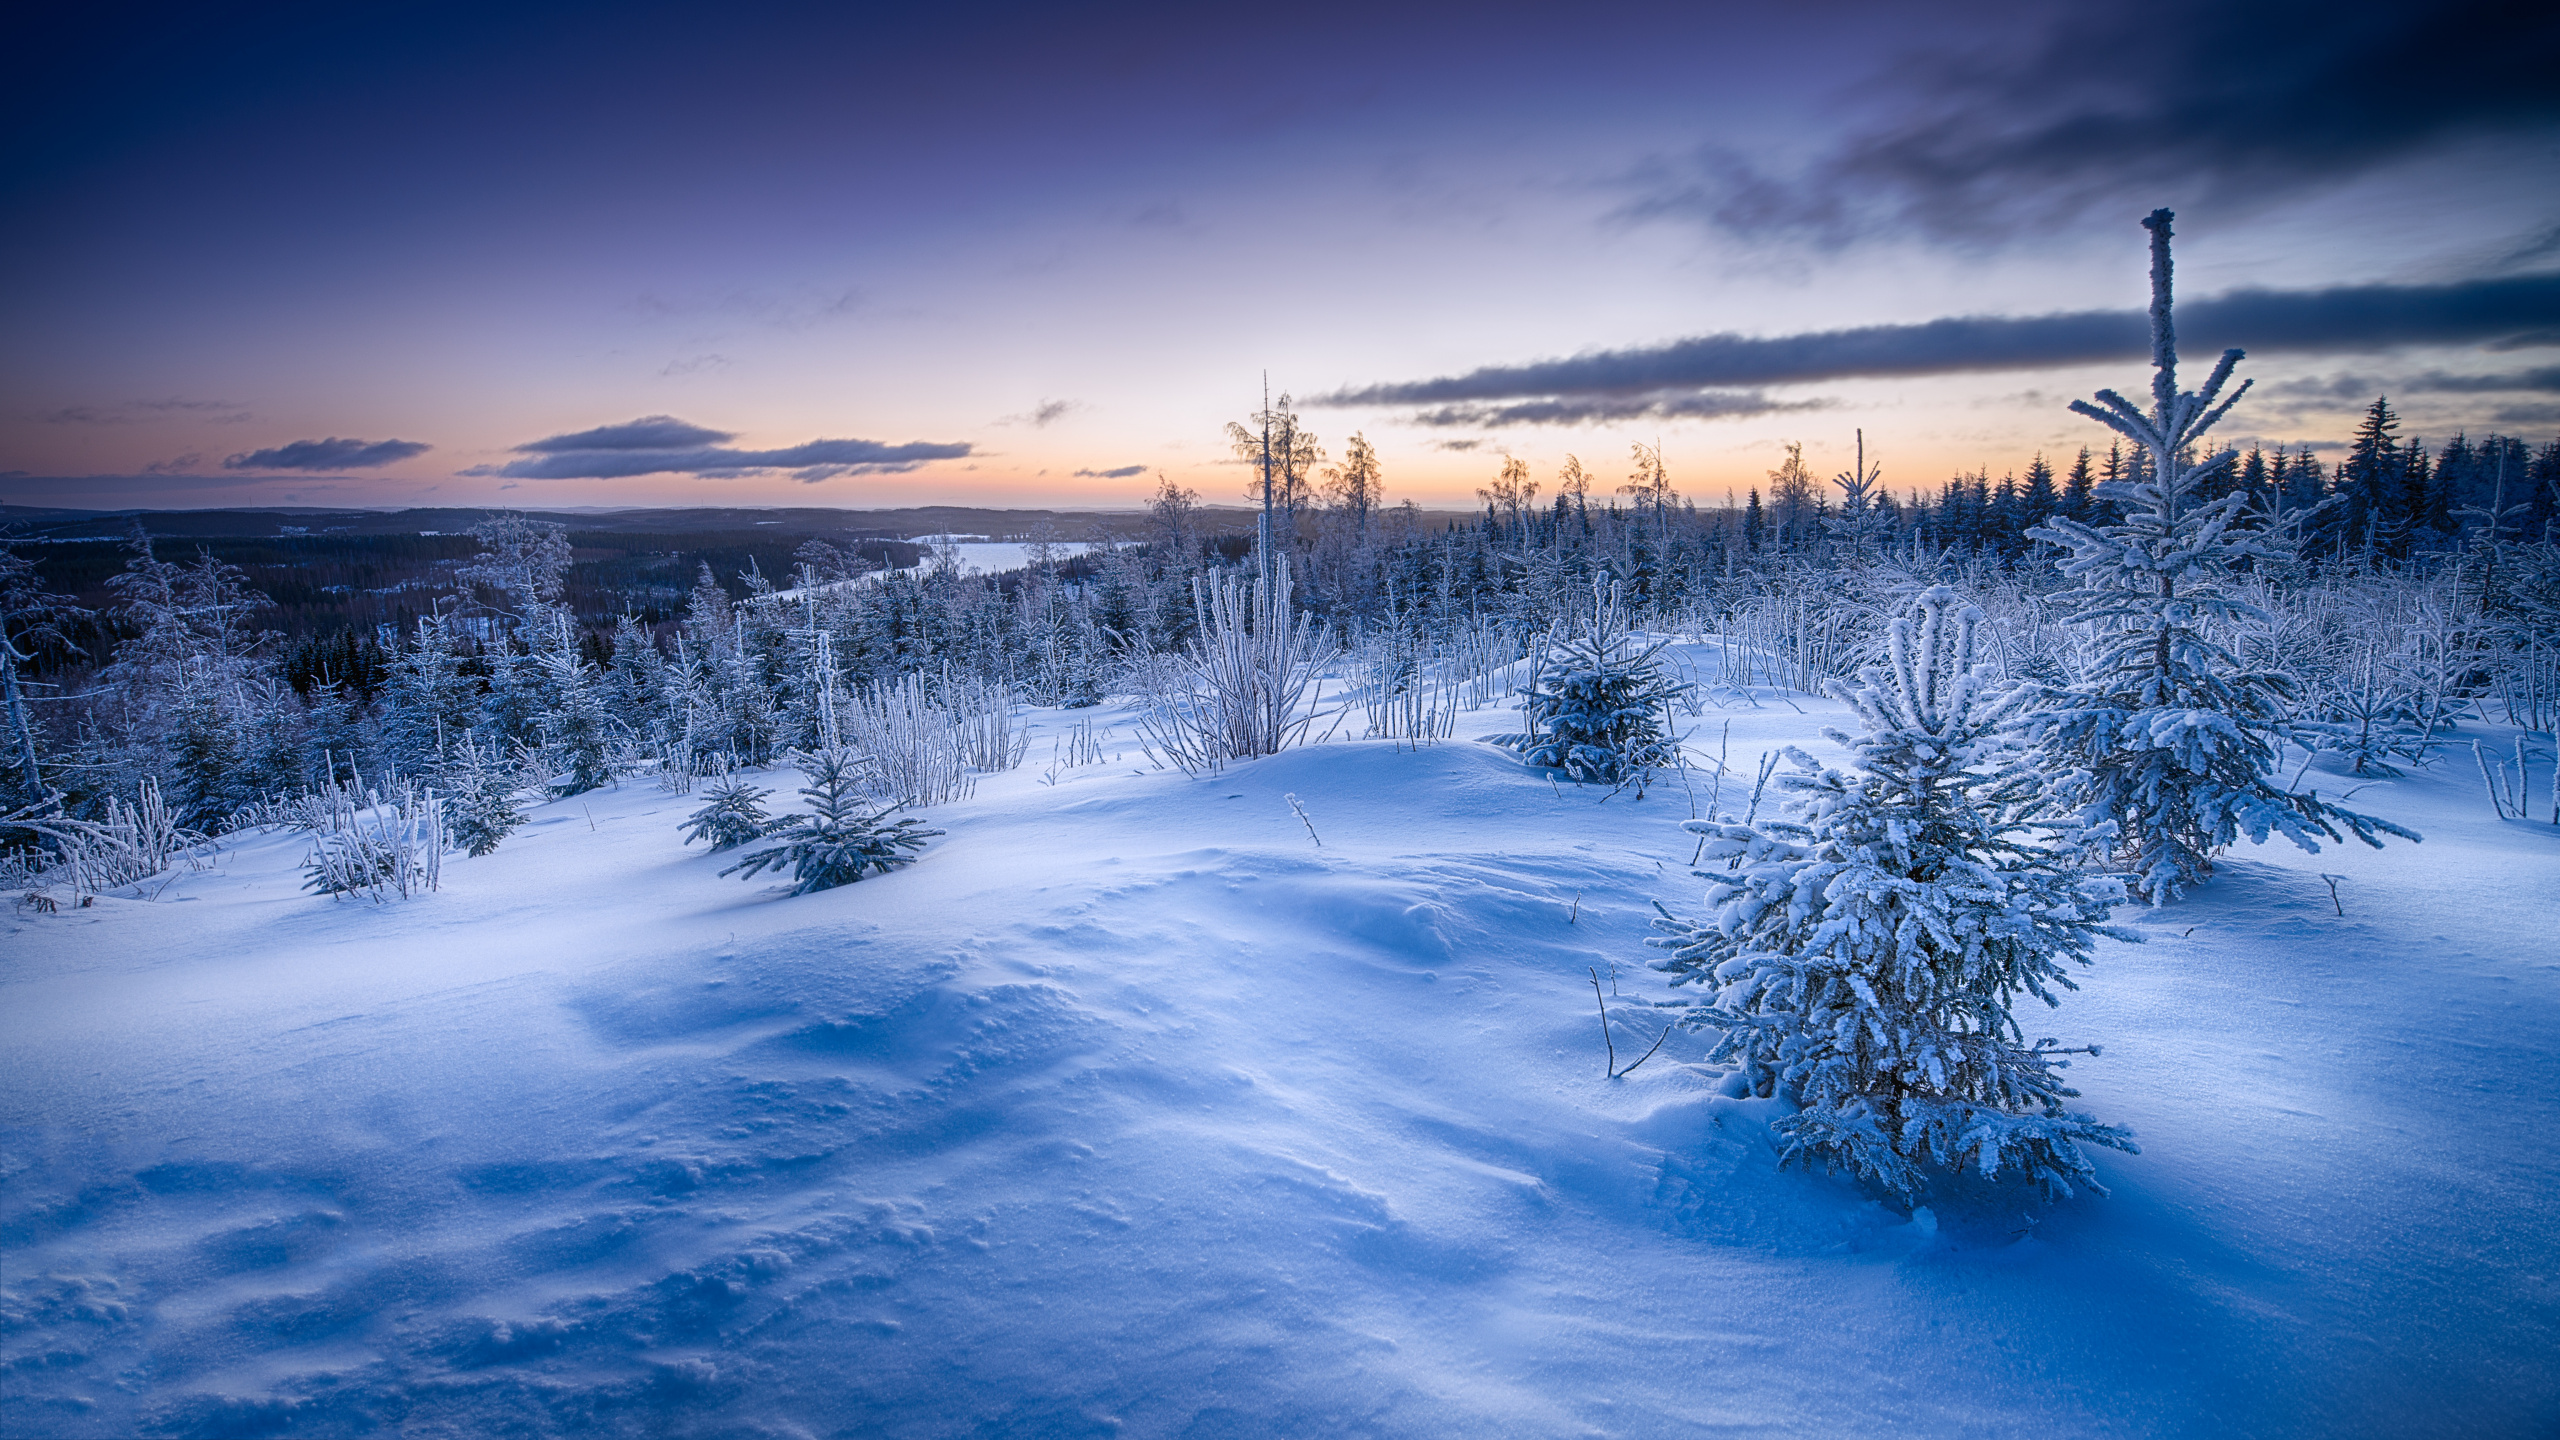 Snow Covered Field and Trees During Daytime. Wallpaper in 2560x1440 Resolution